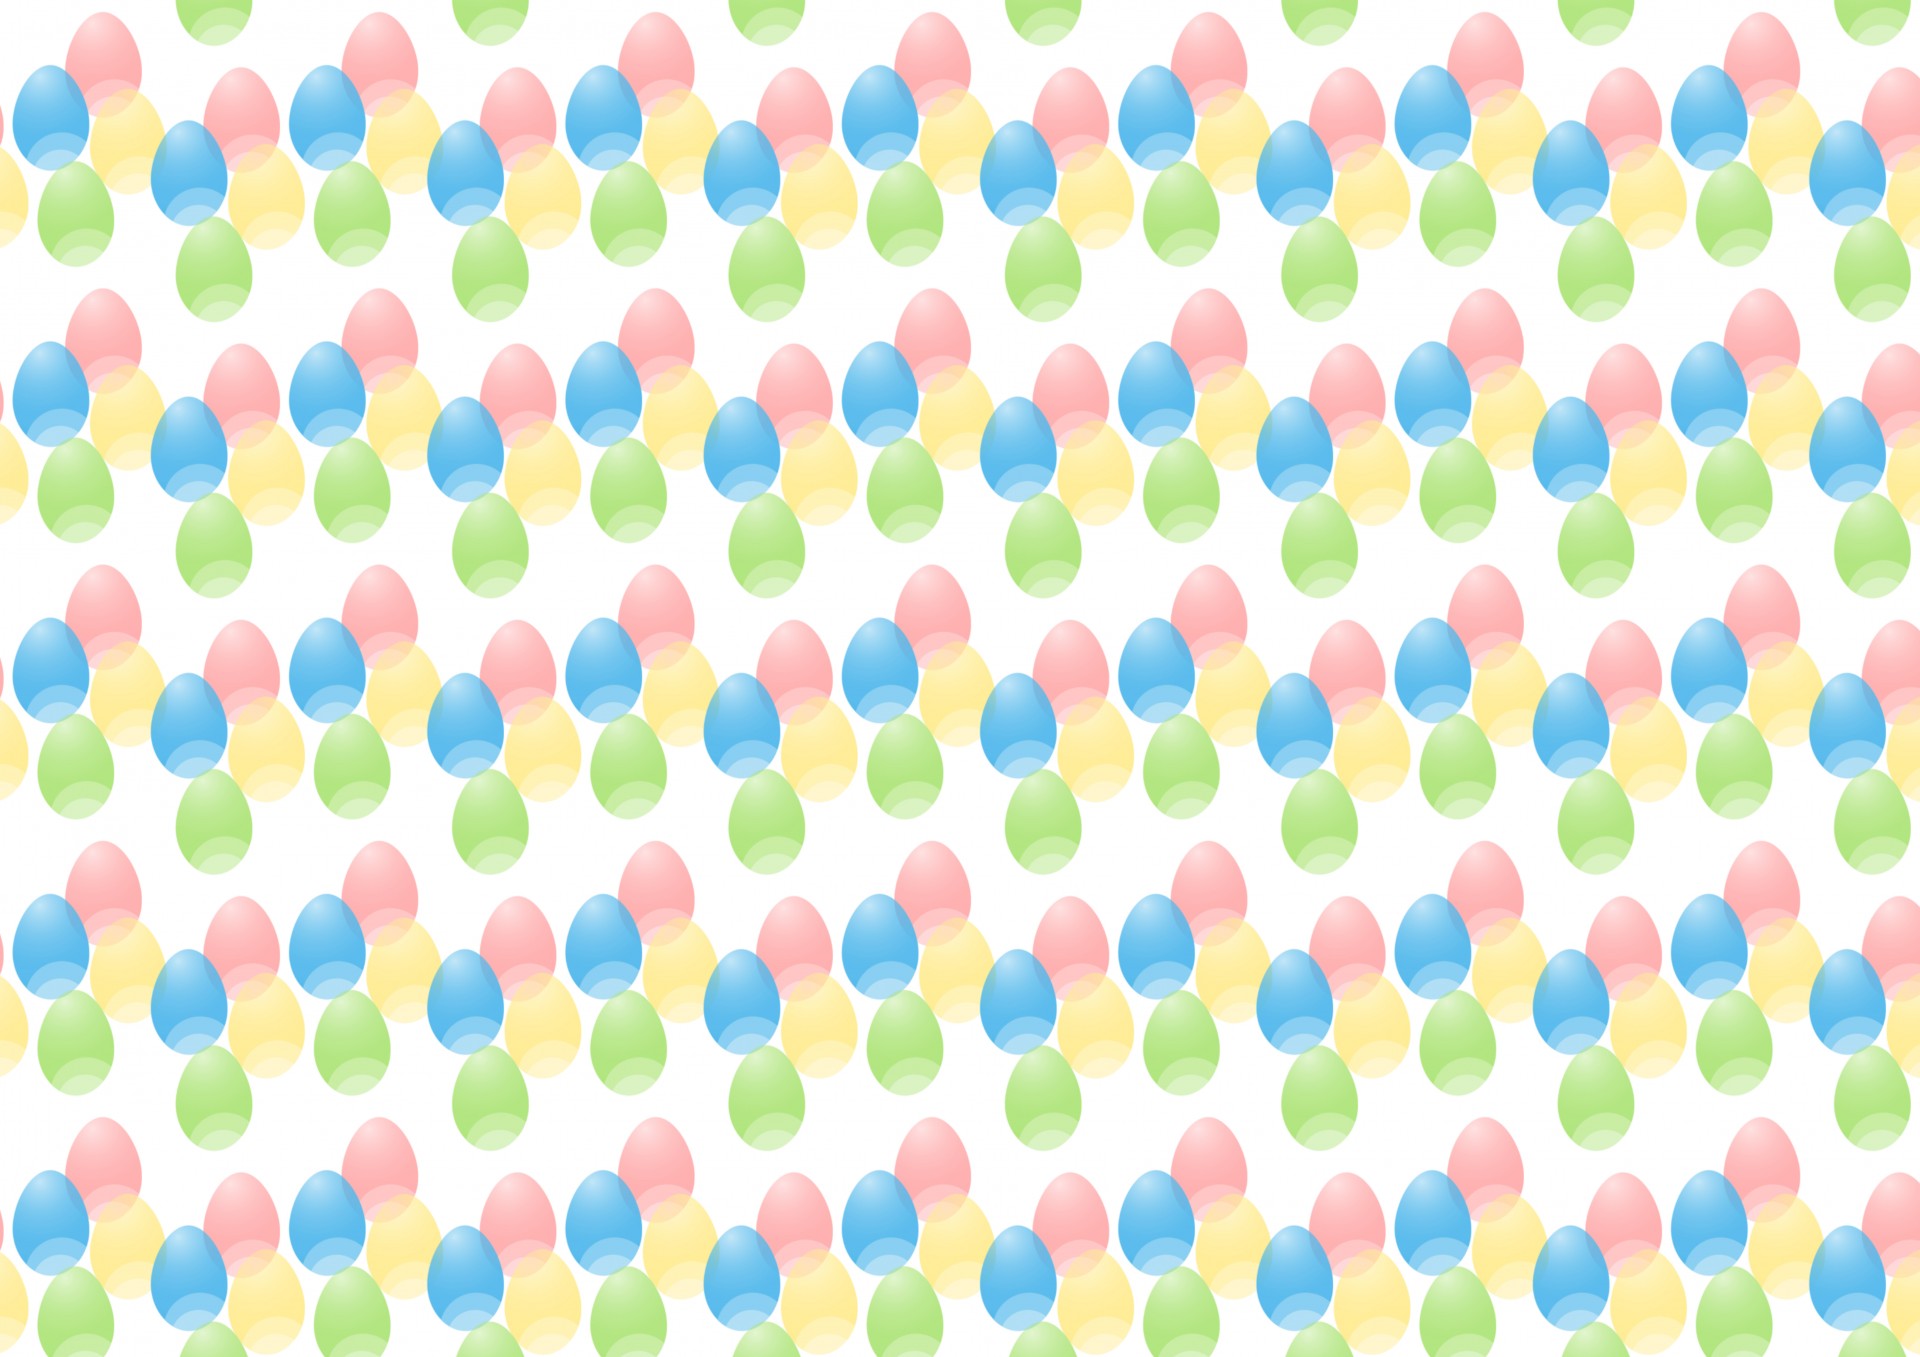 Background Wallpaper Circles Free Photo - Easter Egg Wallpaper Free - HD Wallpaper 